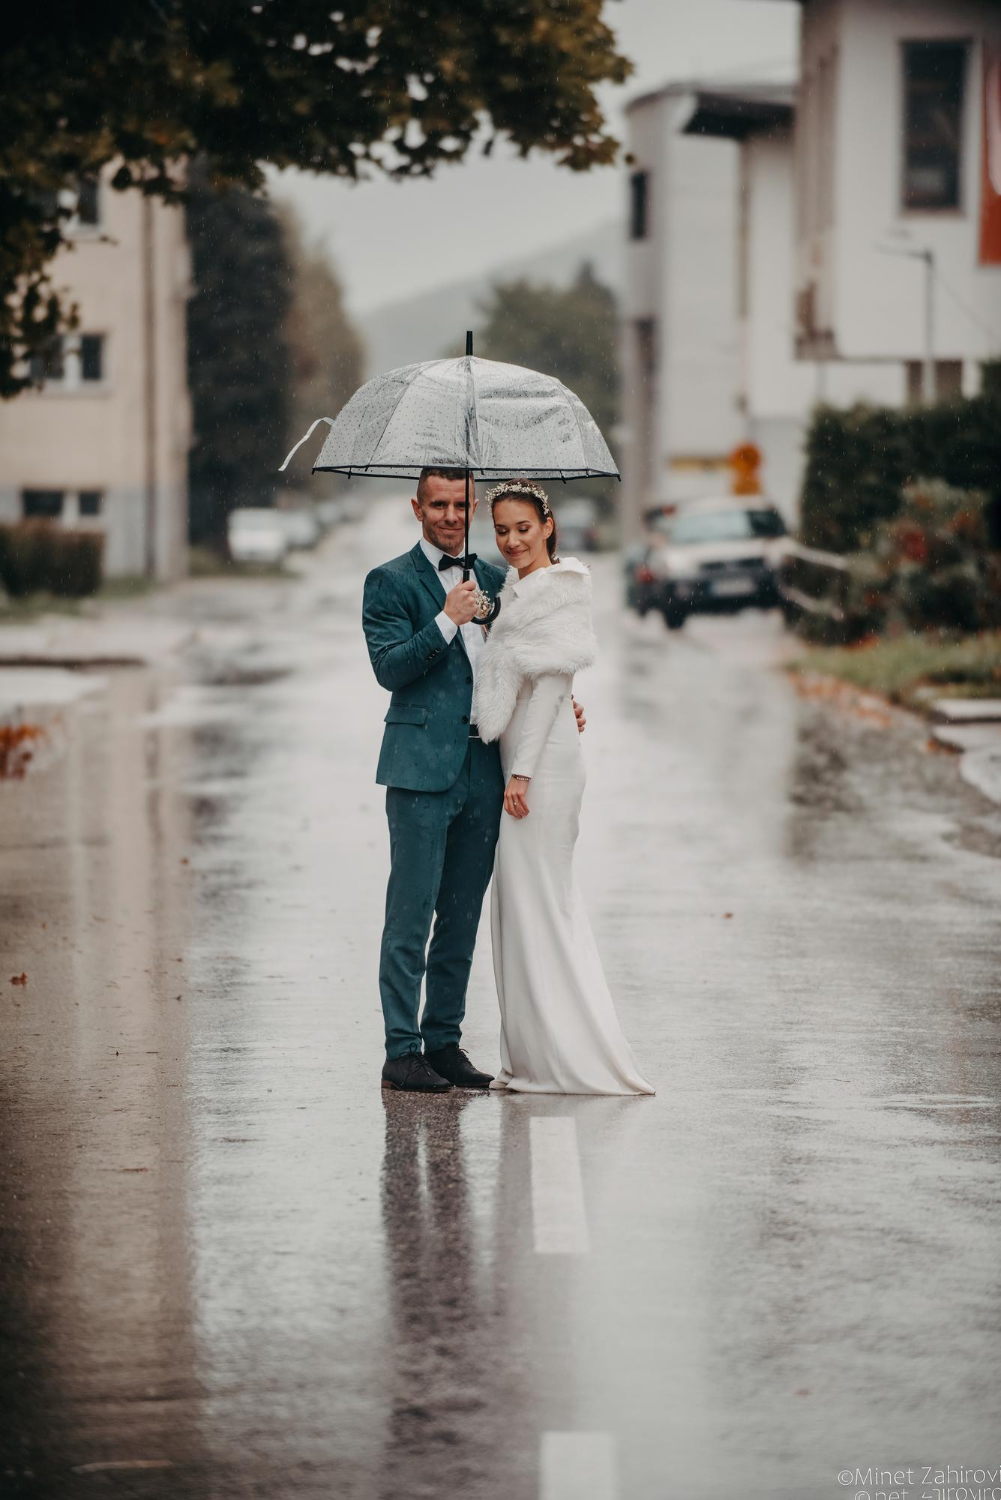 wedding happy moments. a happy young couple, newlyweds walking the streets in rainy weather